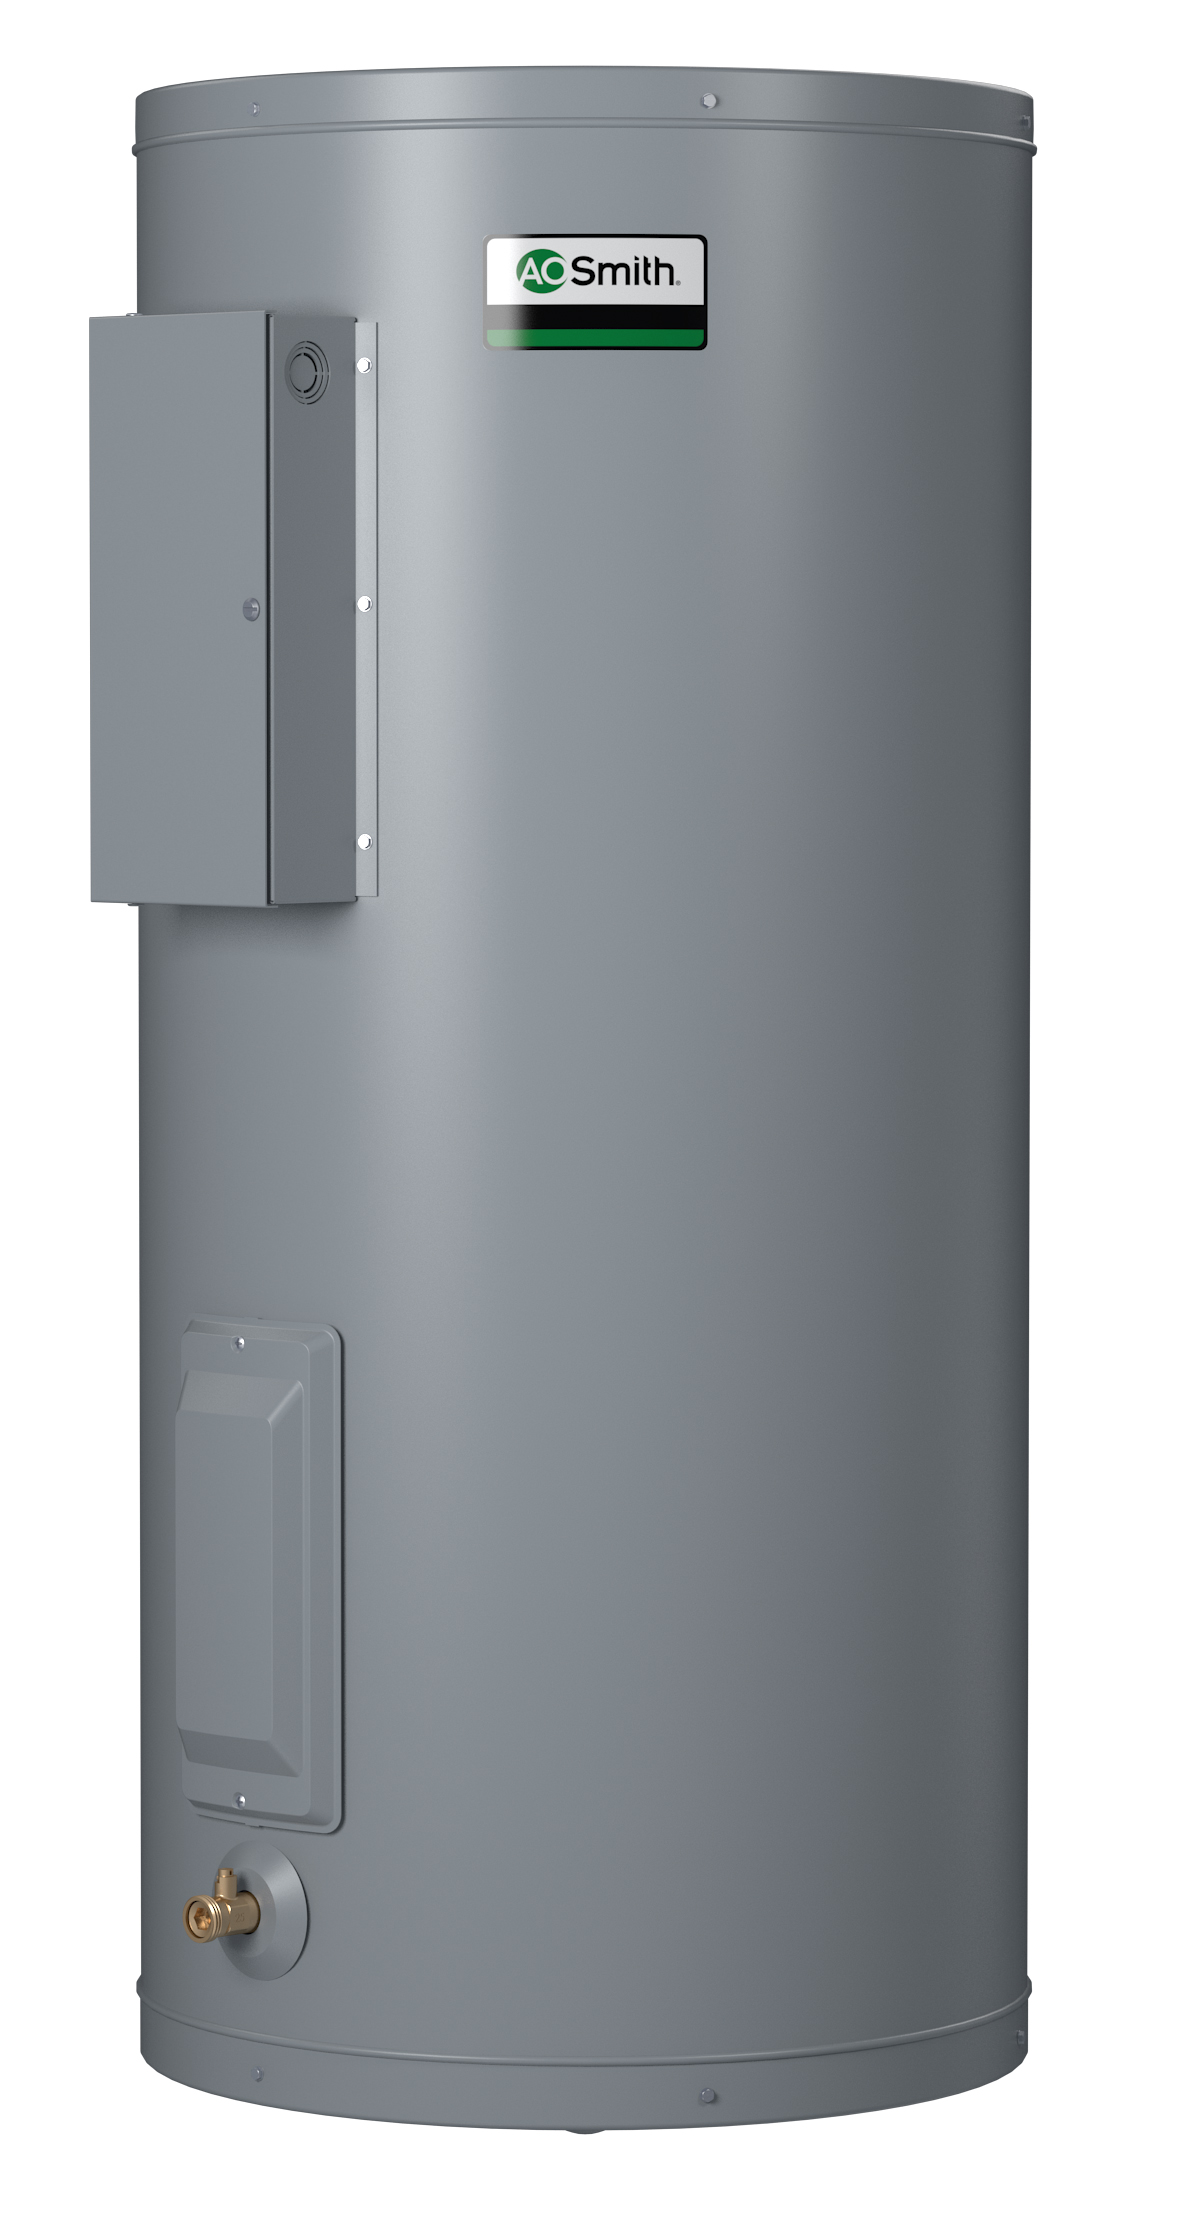 AO SMITH DEL-10S: 10 GALLONS, 3.0KW, 240 VOLT, 12.5 AMPS, 1 PHASE, SINGLE ELEMENT, LIGHT DUTY COMMERCIAL ELECTRIC WATER HEATER, DURA-POWER